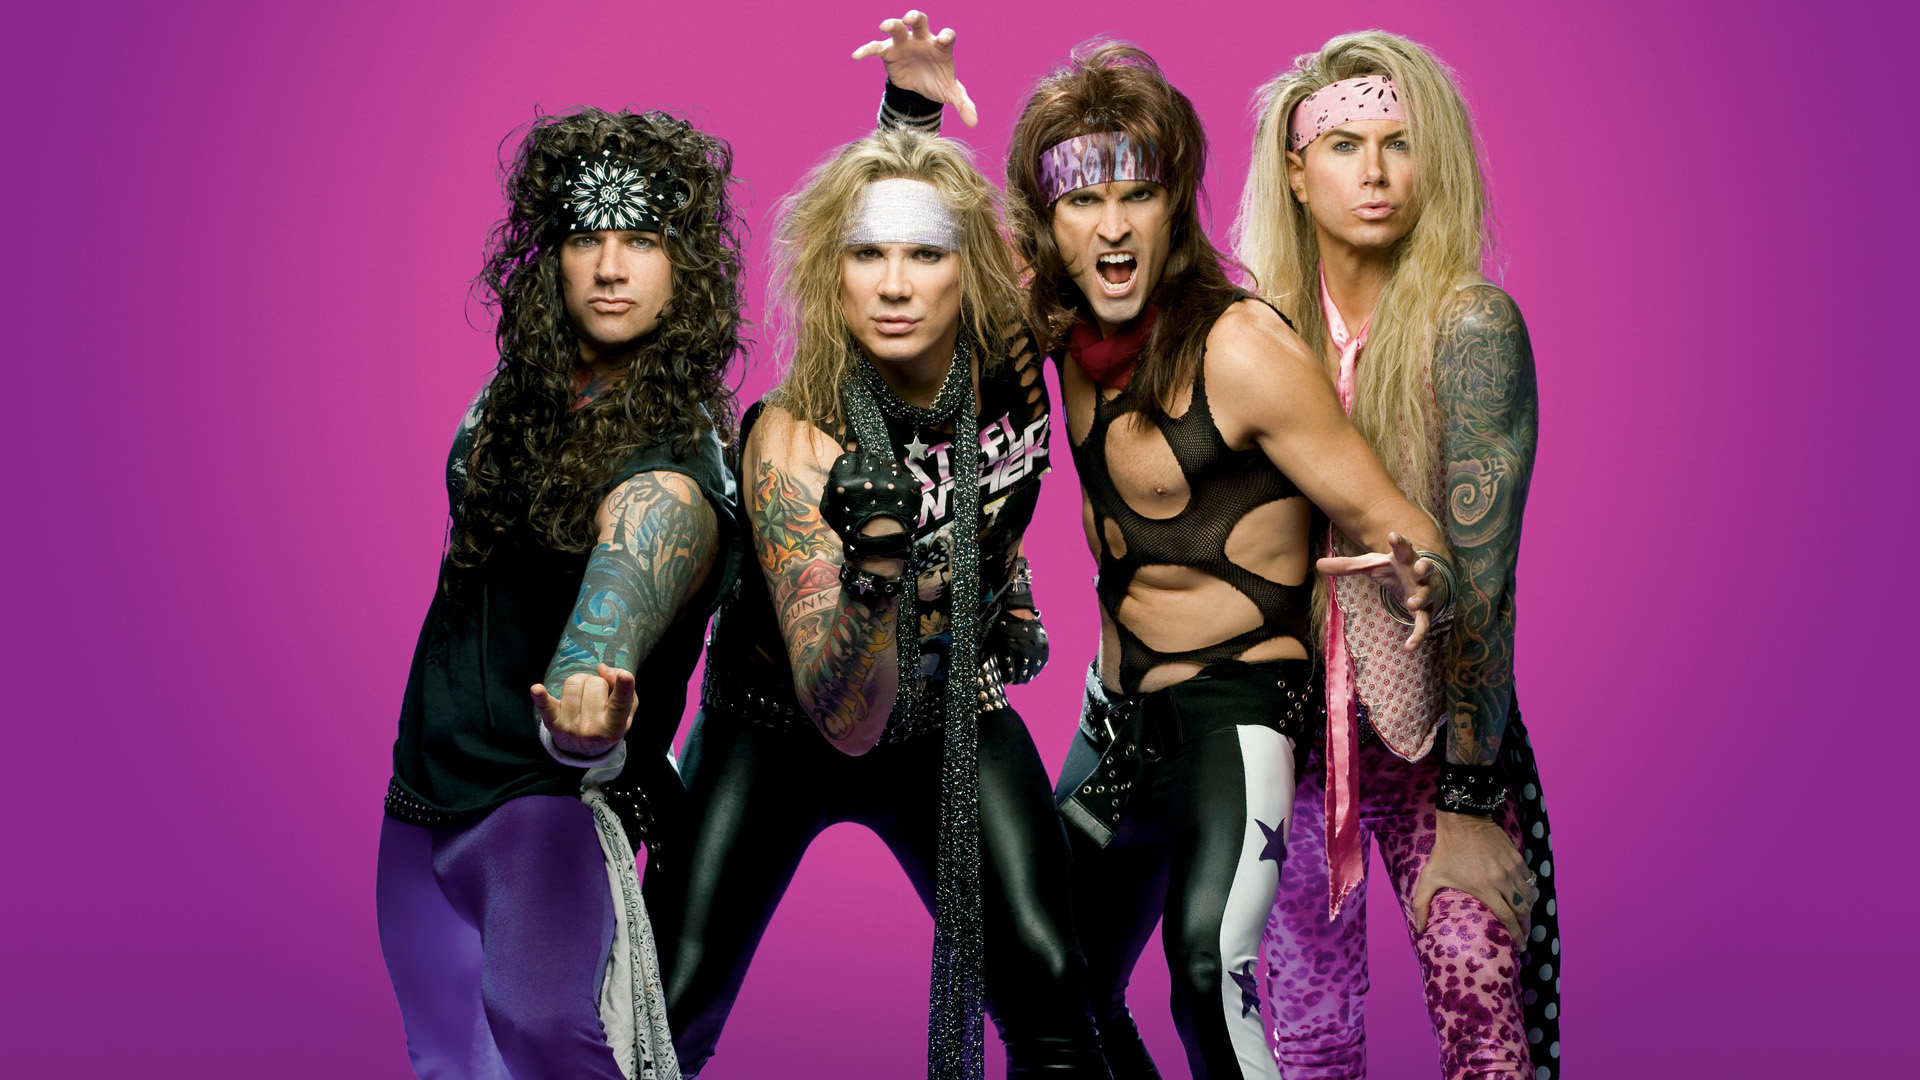 Steel Panther Lanza Nuevo V Deo